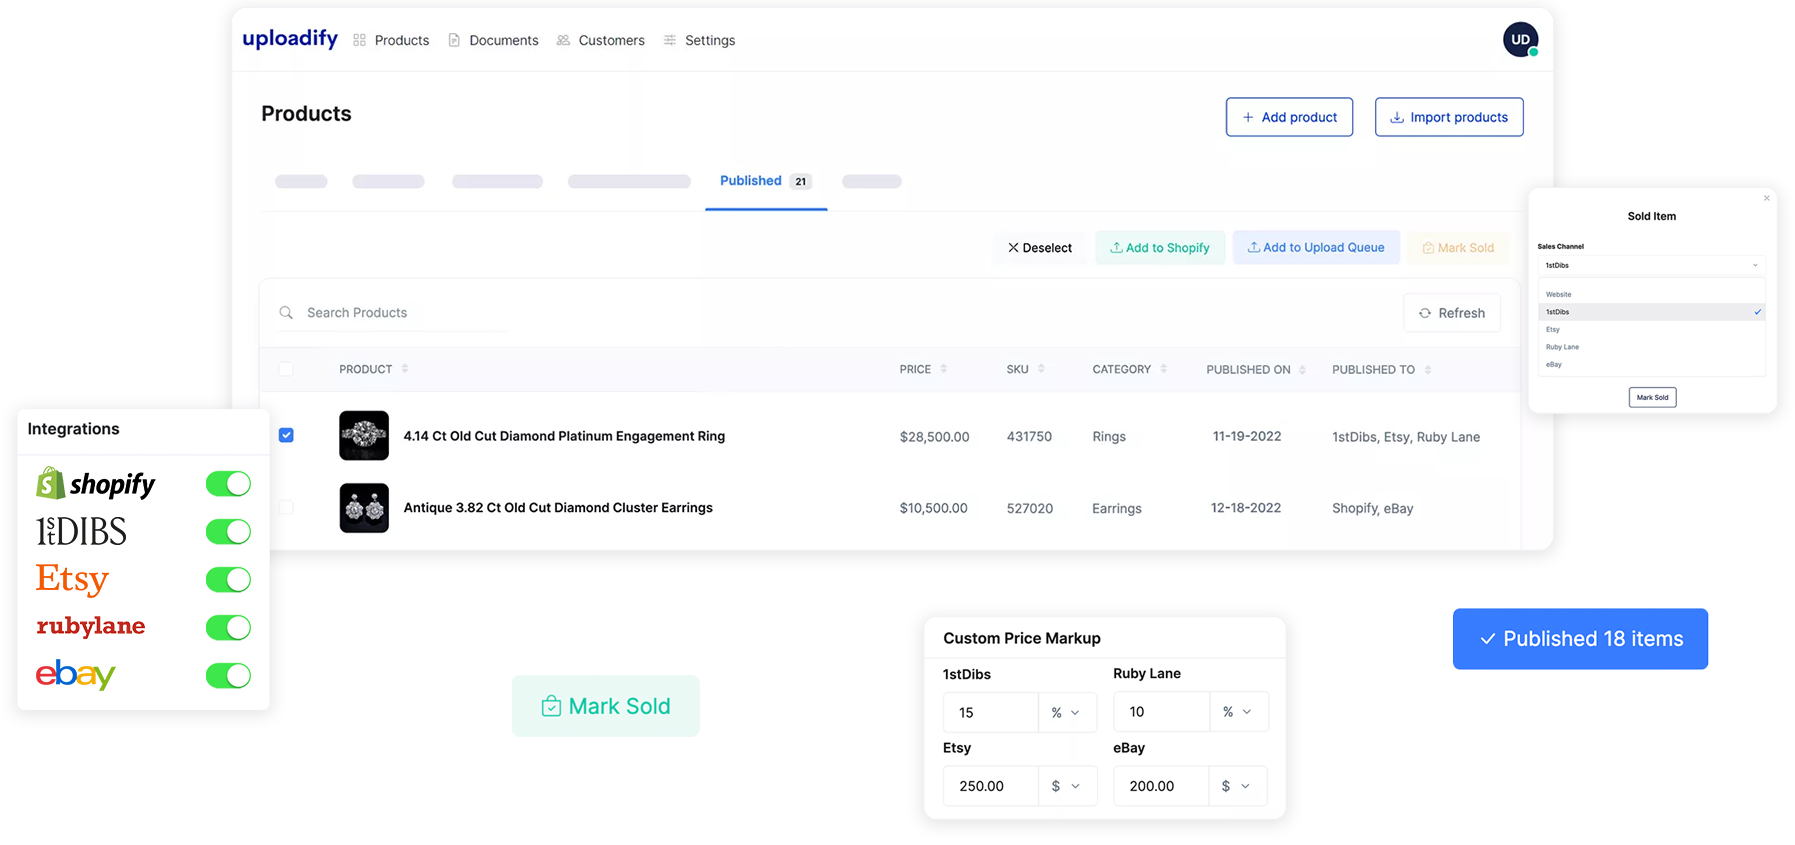 eCommerce Automation Overview